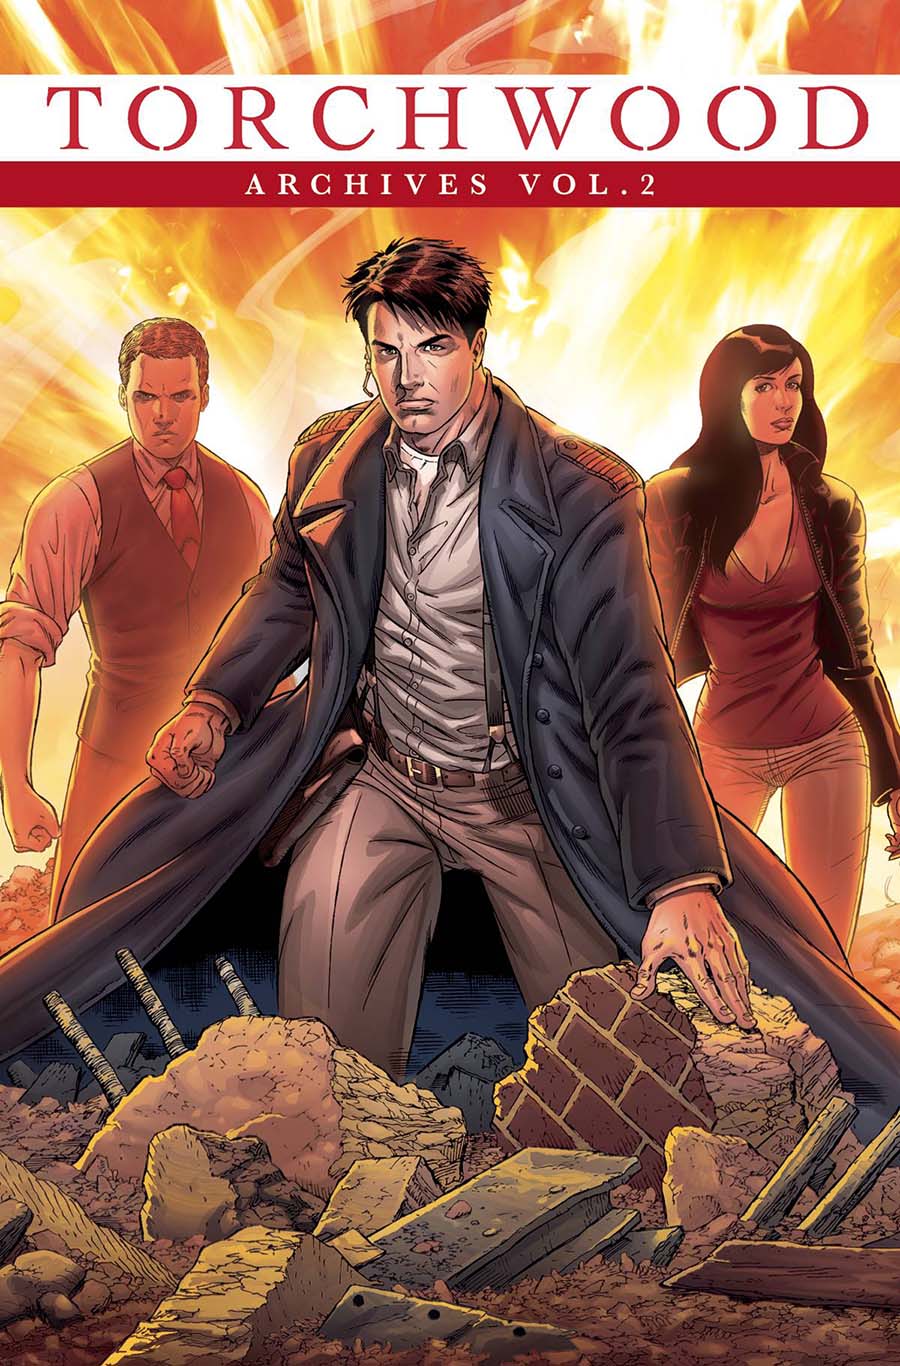 Torchwood Archives Vol 2 TP